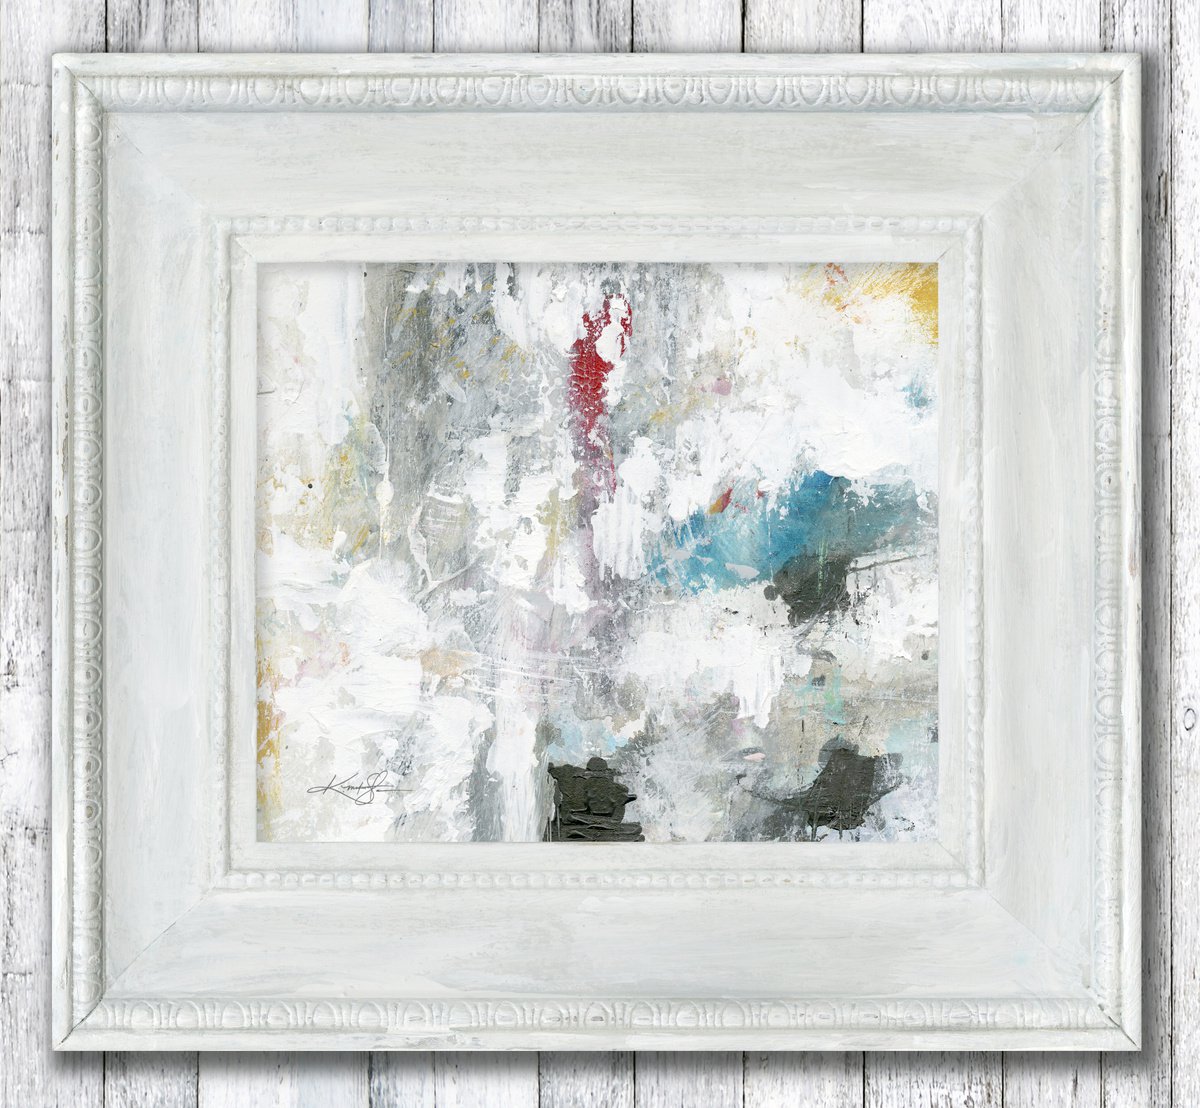 A Divine Encounter 5 - Framed Abstract Painting by Kathy Morton Stanion by Kathy Morton Stanion